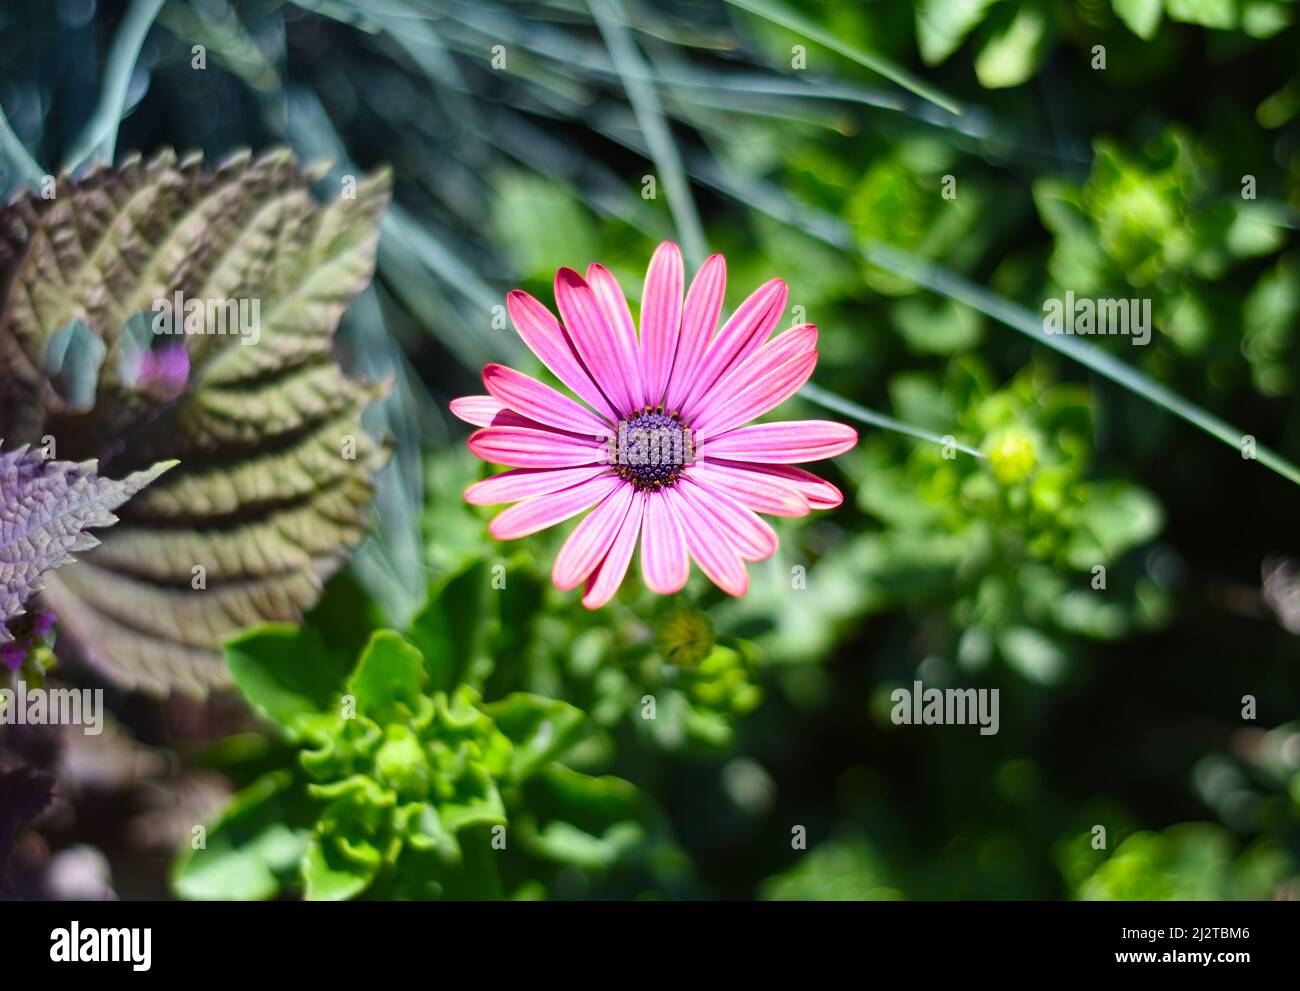 Osteospermum known as the daisybush or African Stock Photo